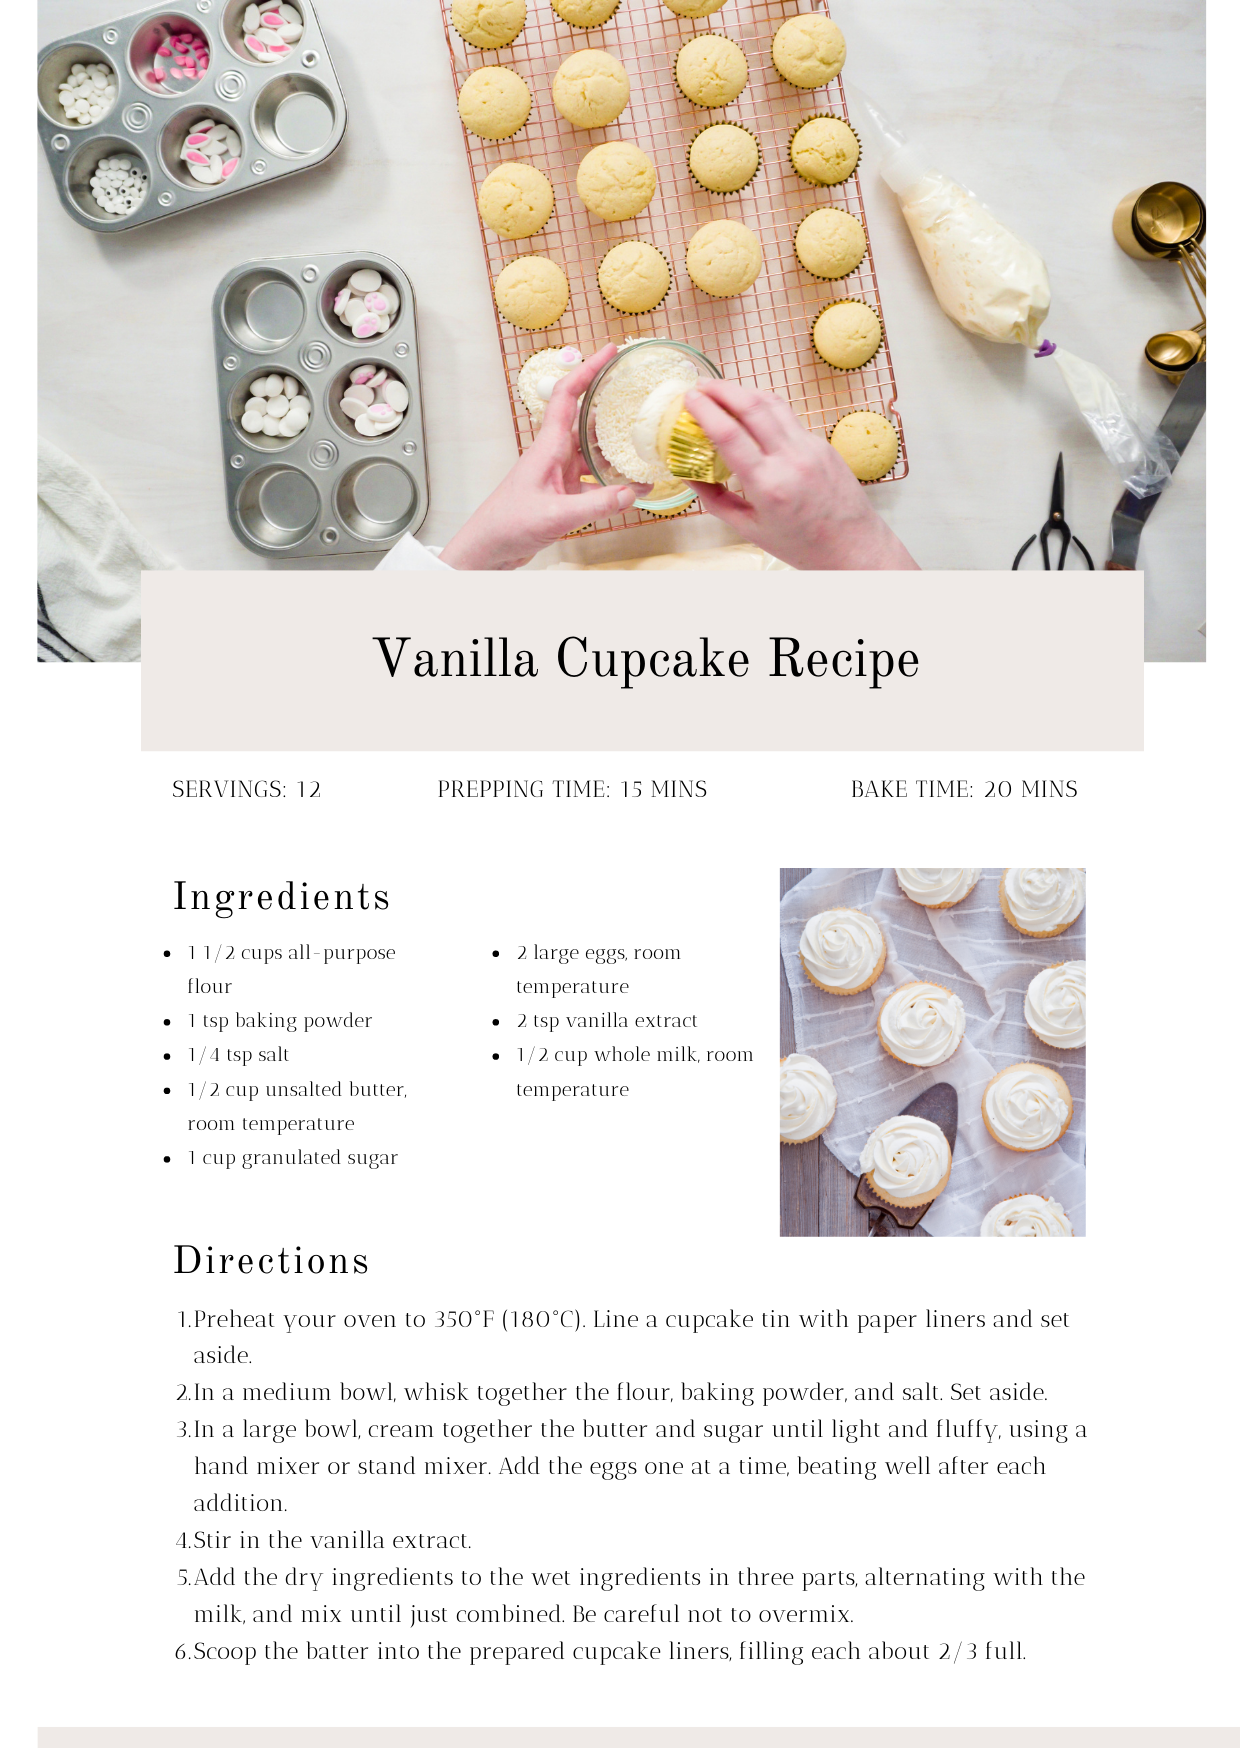 Best Vanilla Cupcakes Recipe: Easy and Delicious | Perfect for Any Occasion